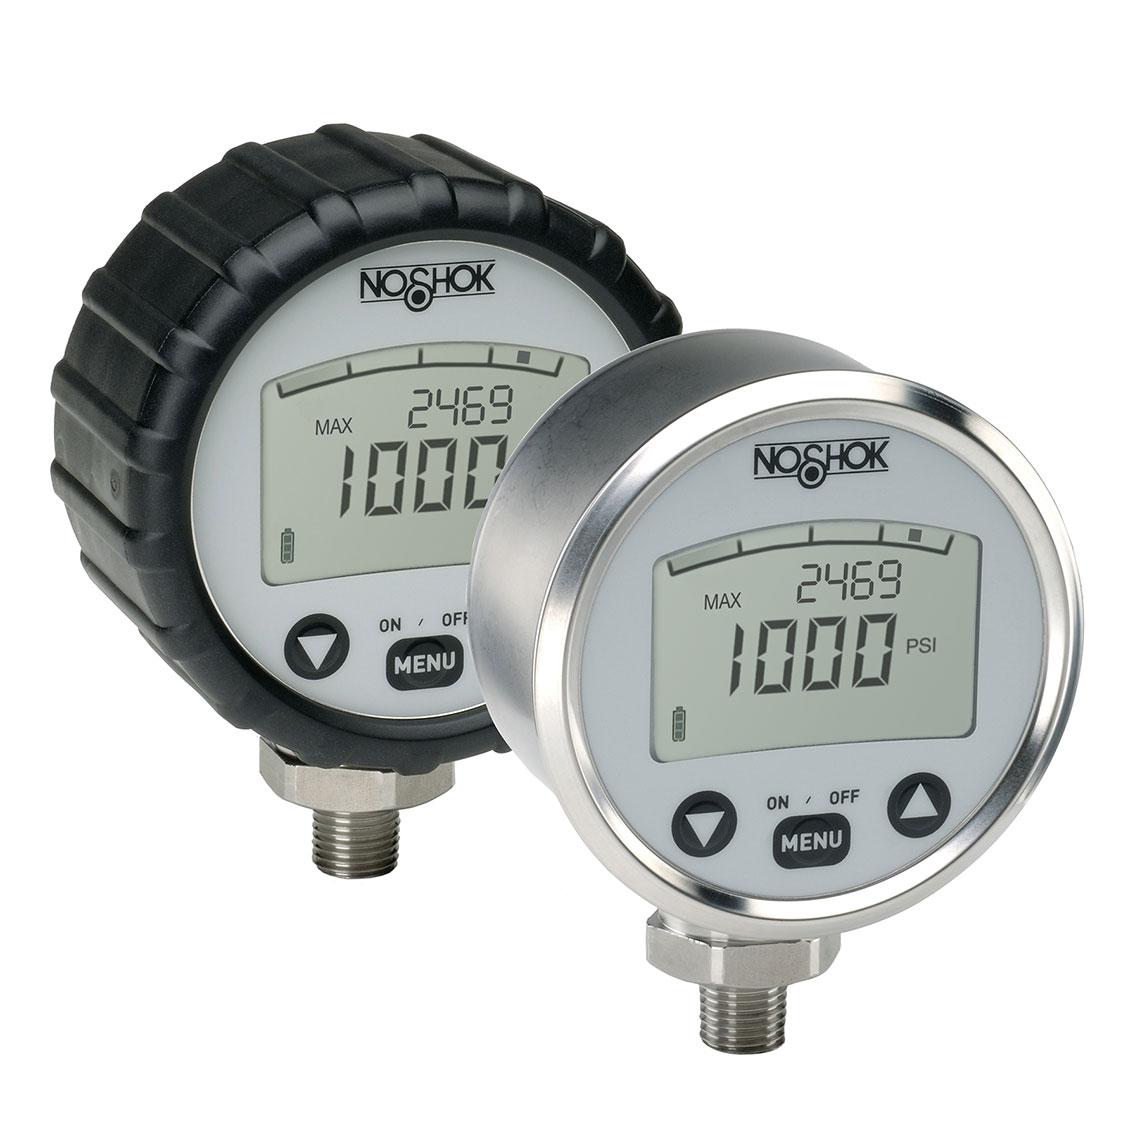 Noshok 1000-1450-2-1-ST8 0 to 1,450 psig, 1/4'' National Pipe Thread (NPT) Male Connection, Digital Pressure Gauge with Peak Memory and 0.8 mm 316 Stainless Steel Threaded Orifice